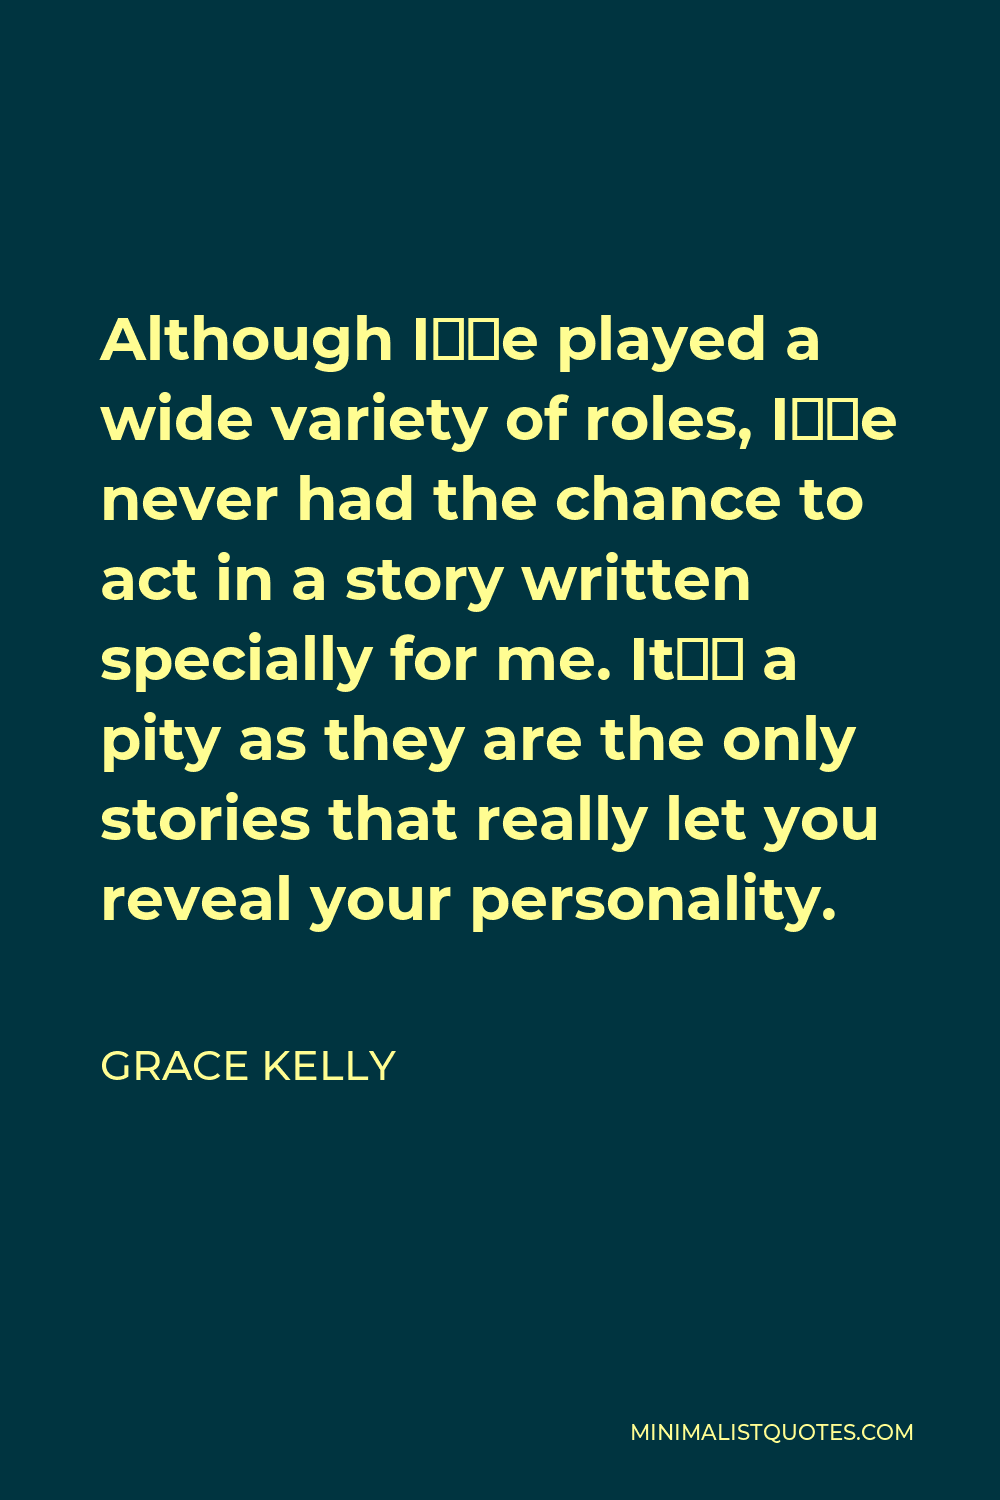 Grace Kelly Quote - Although I’ve played a wide variety of roles, I’ve never had the chance to act in a story written specially for me. It’s a pity as they are the only stories that really let you reveal your personality.